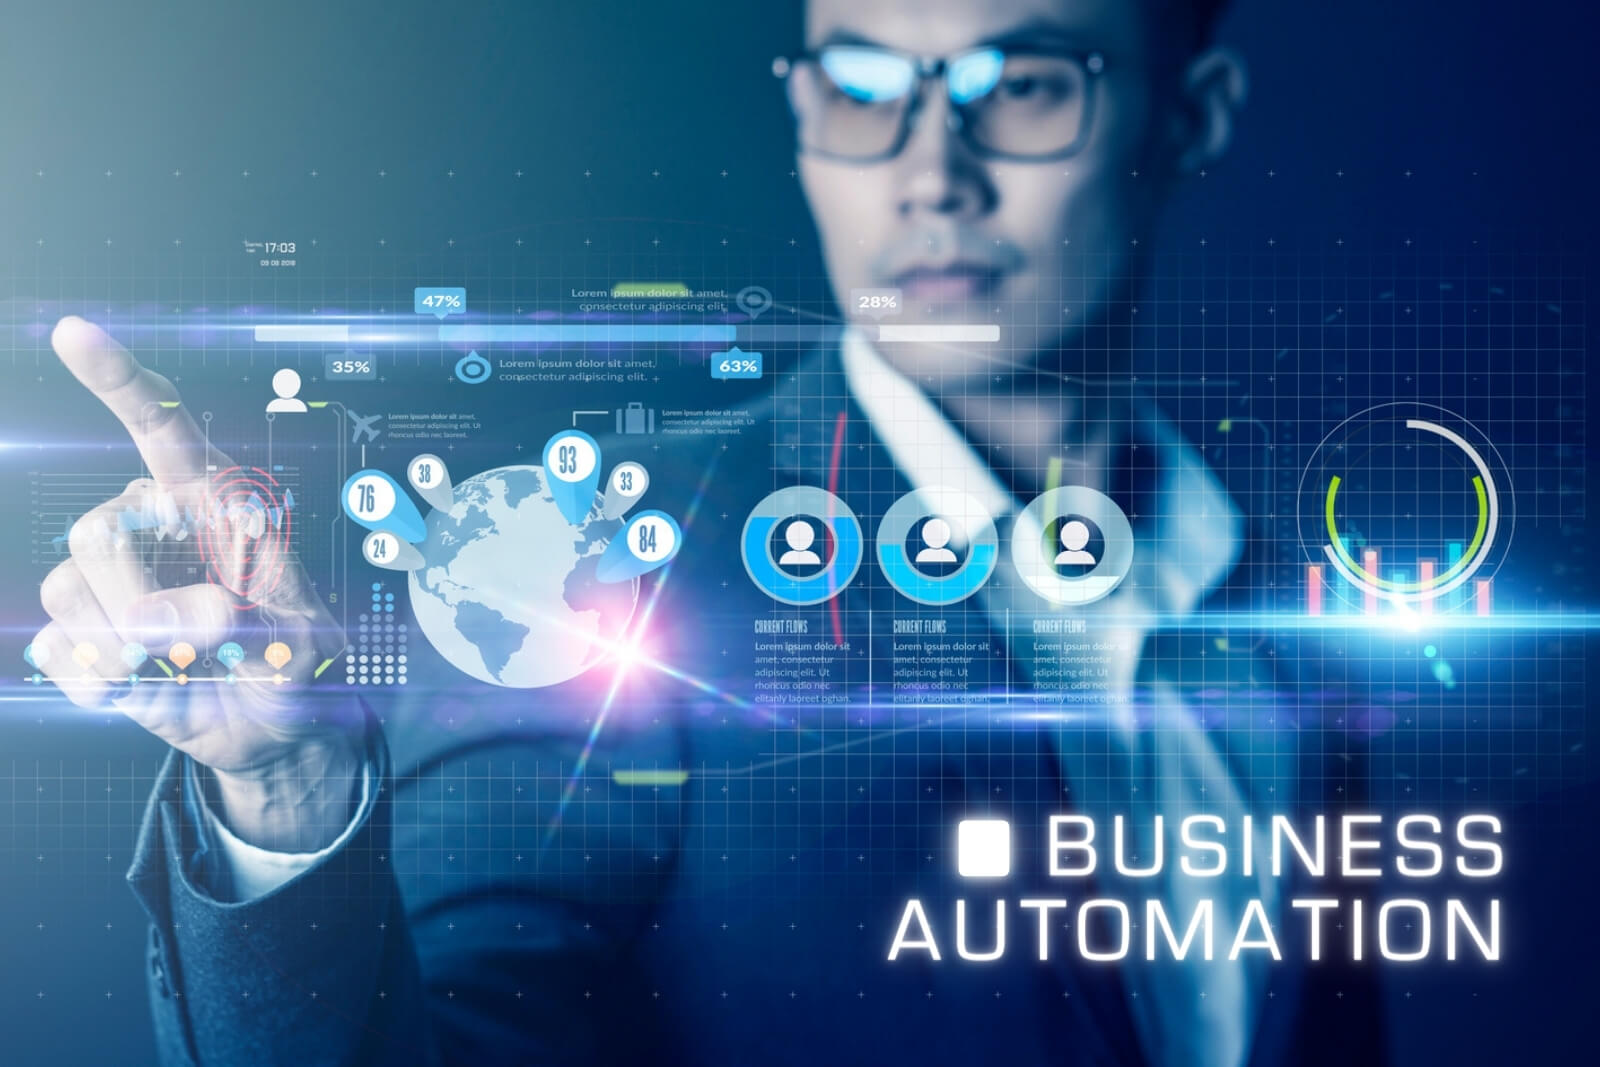 Infographic depicting automation's impact in business growth, from lead capture to client retention